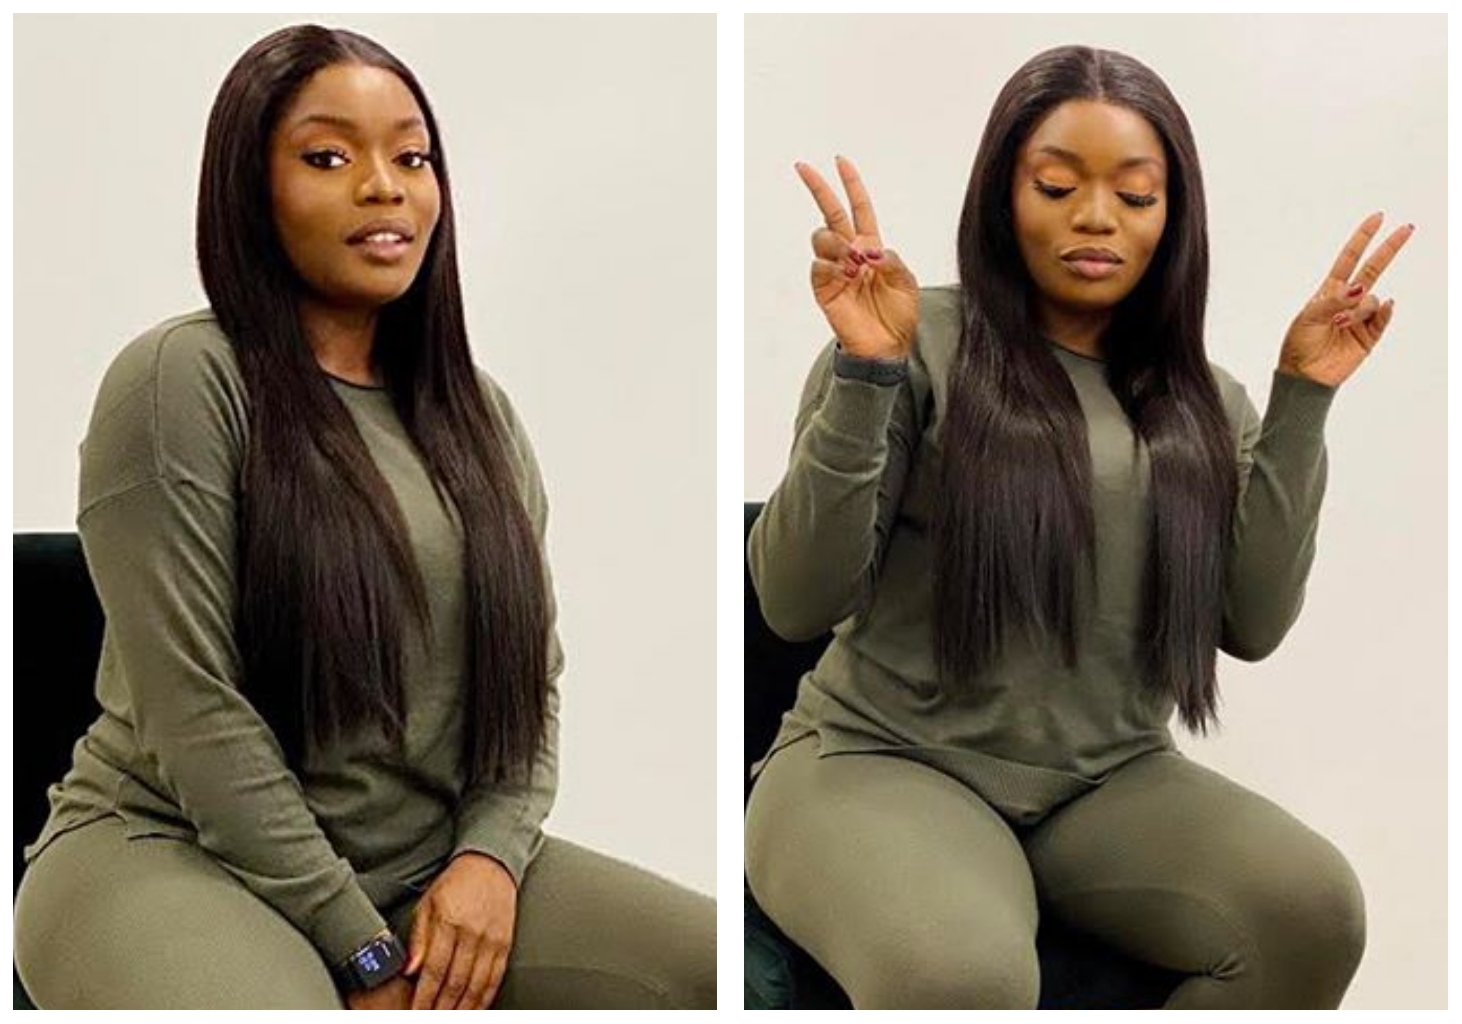 "I'm a cool chic" – BBNaija Bisola light up fans world with new sexy photos